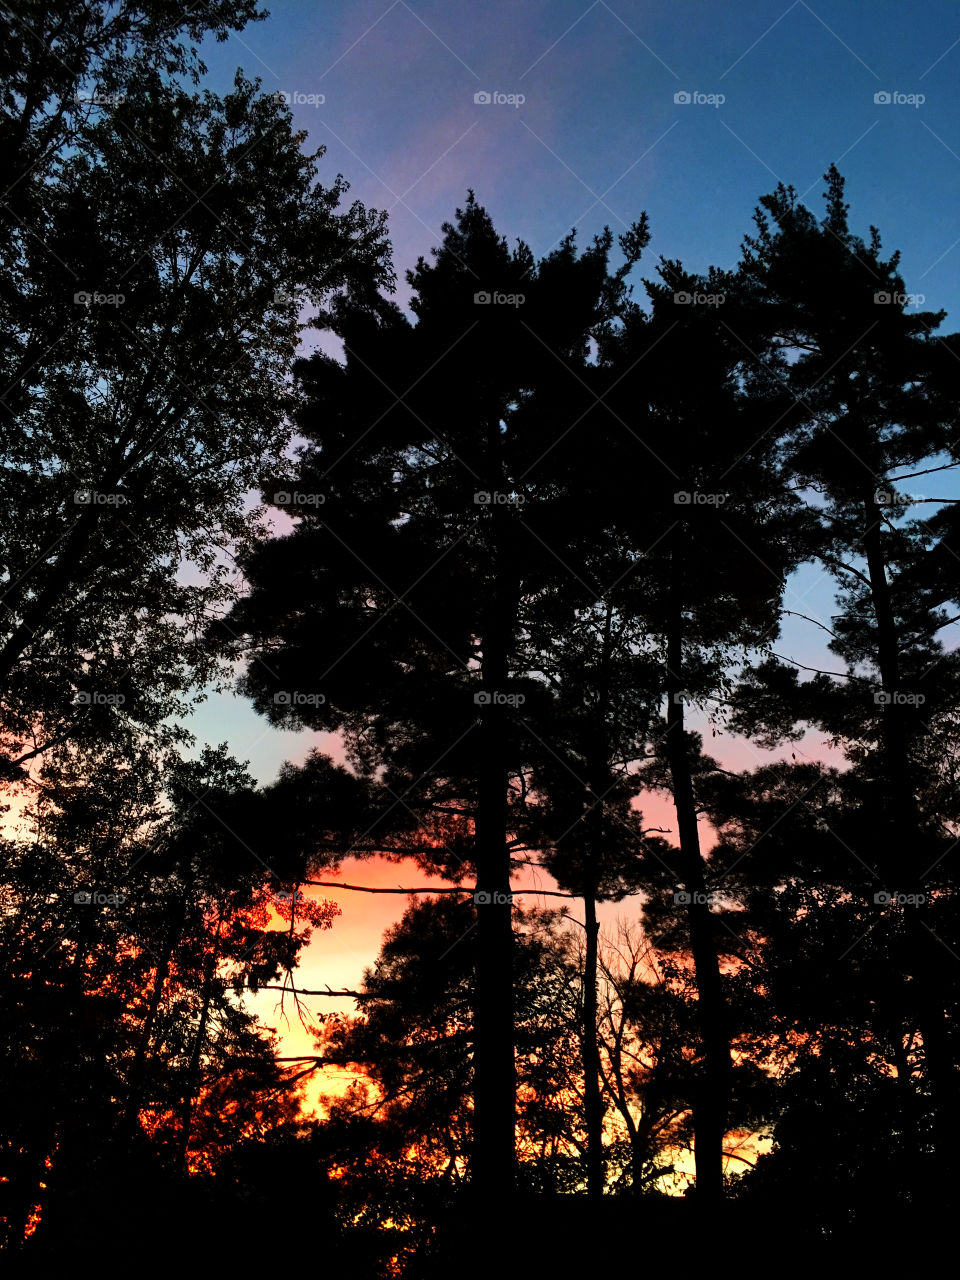 Sunset and trees